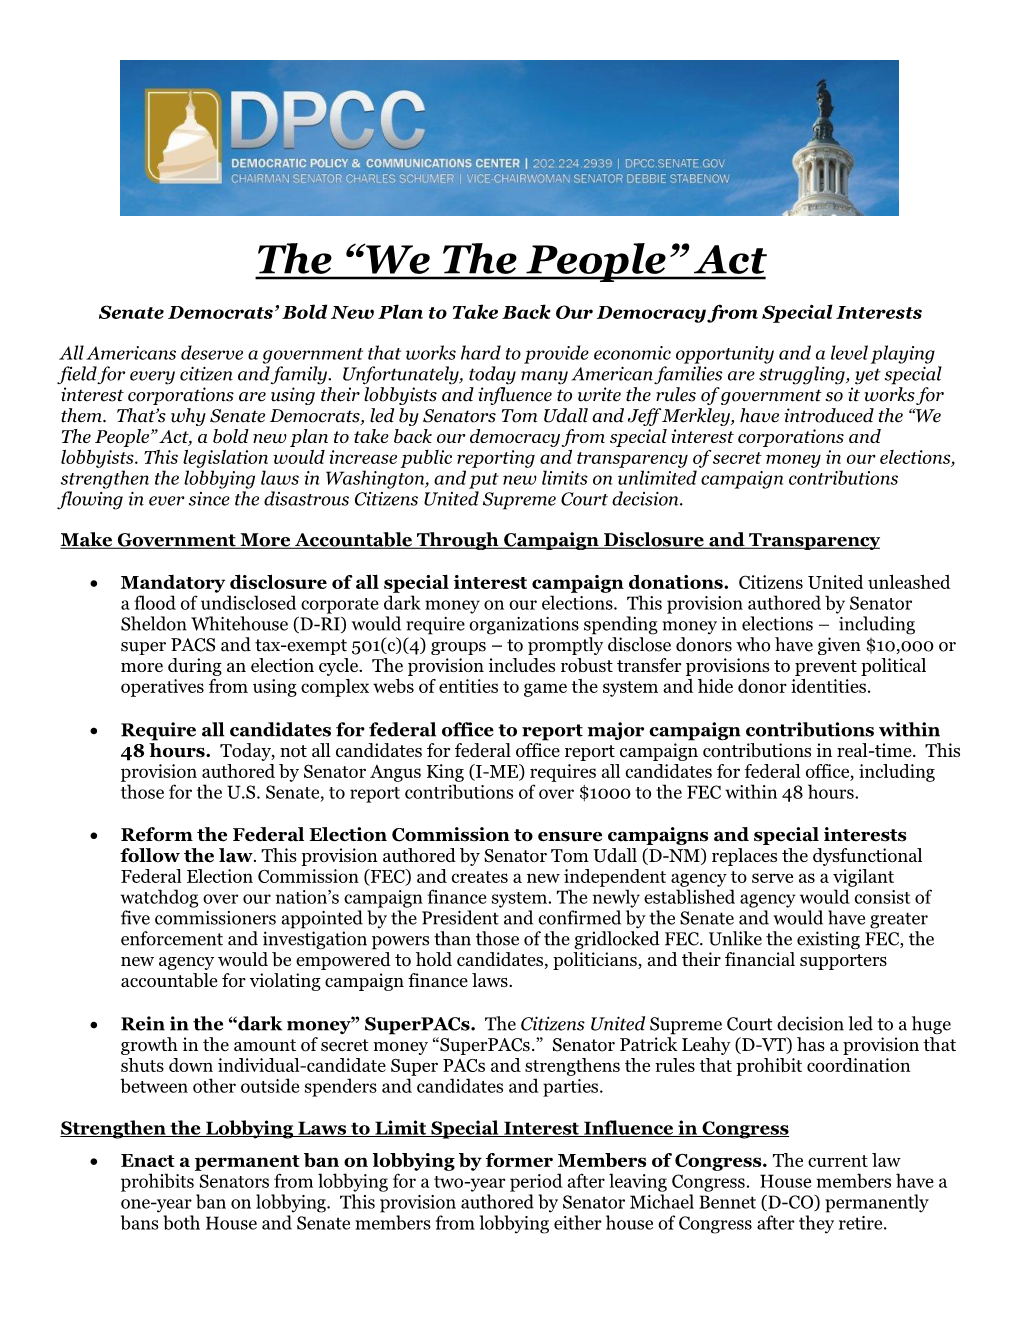 The “We the People” Act